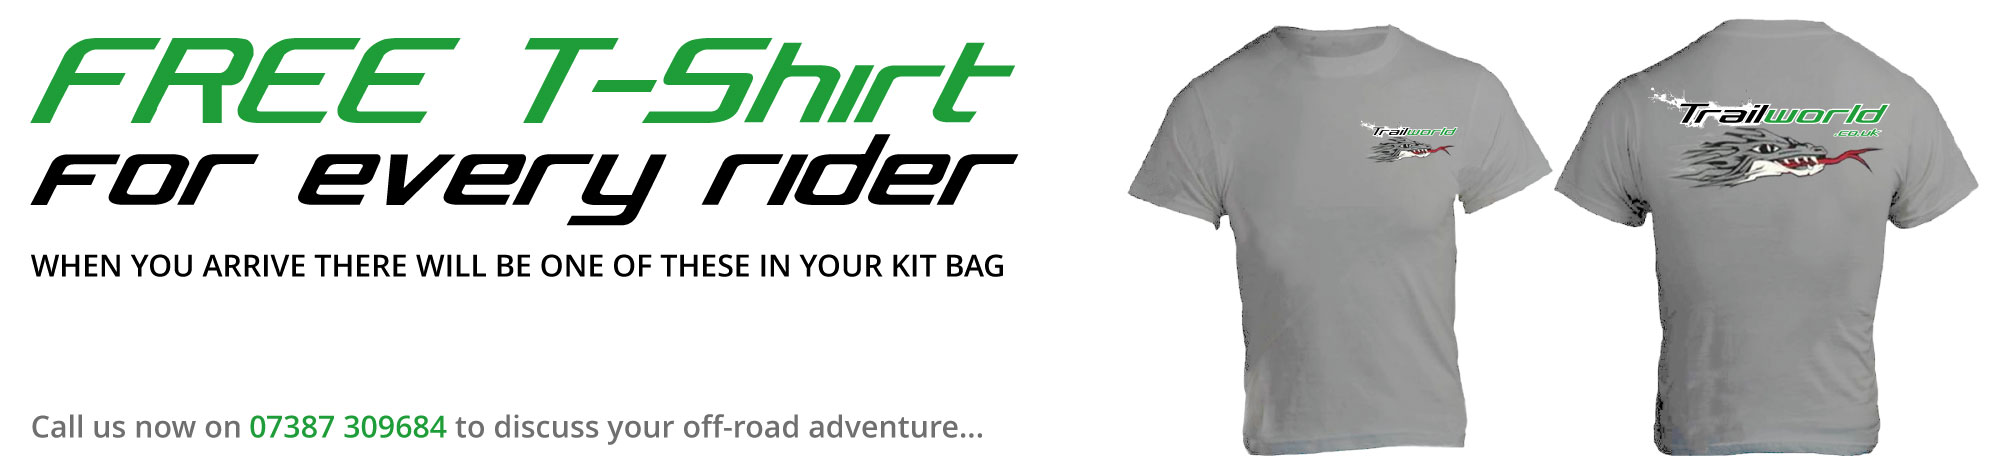 FREE Cotton T-Shirt for every rider